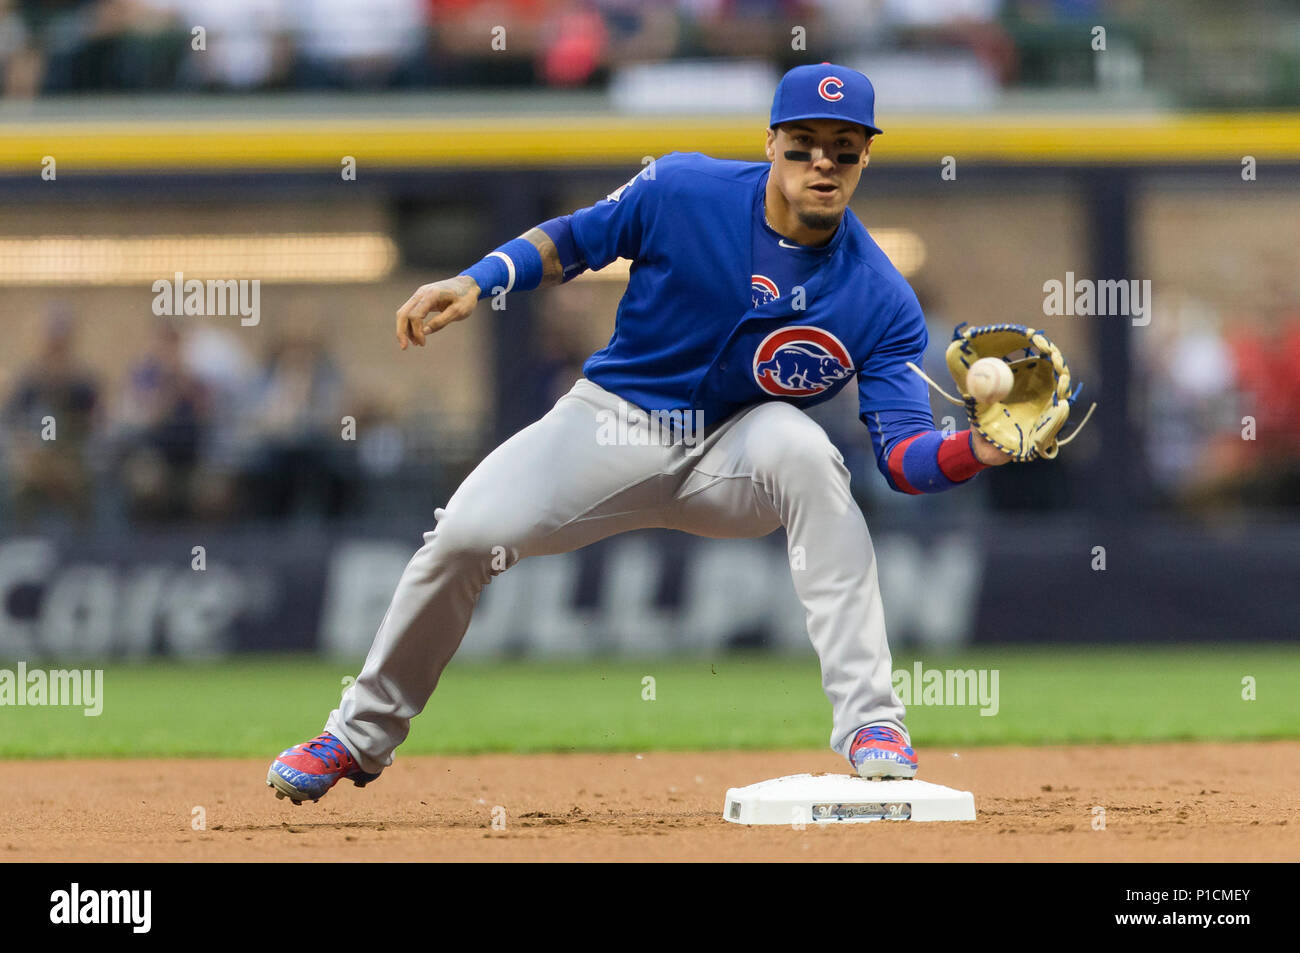 Milwaukee, WI, USA. 11th June, 2018. Chicago Cubs second baseman Javier Baez  #9 turns a double play during the Major League Baseball game between the  Milwaukee Brewers and the Chicago Cubs at